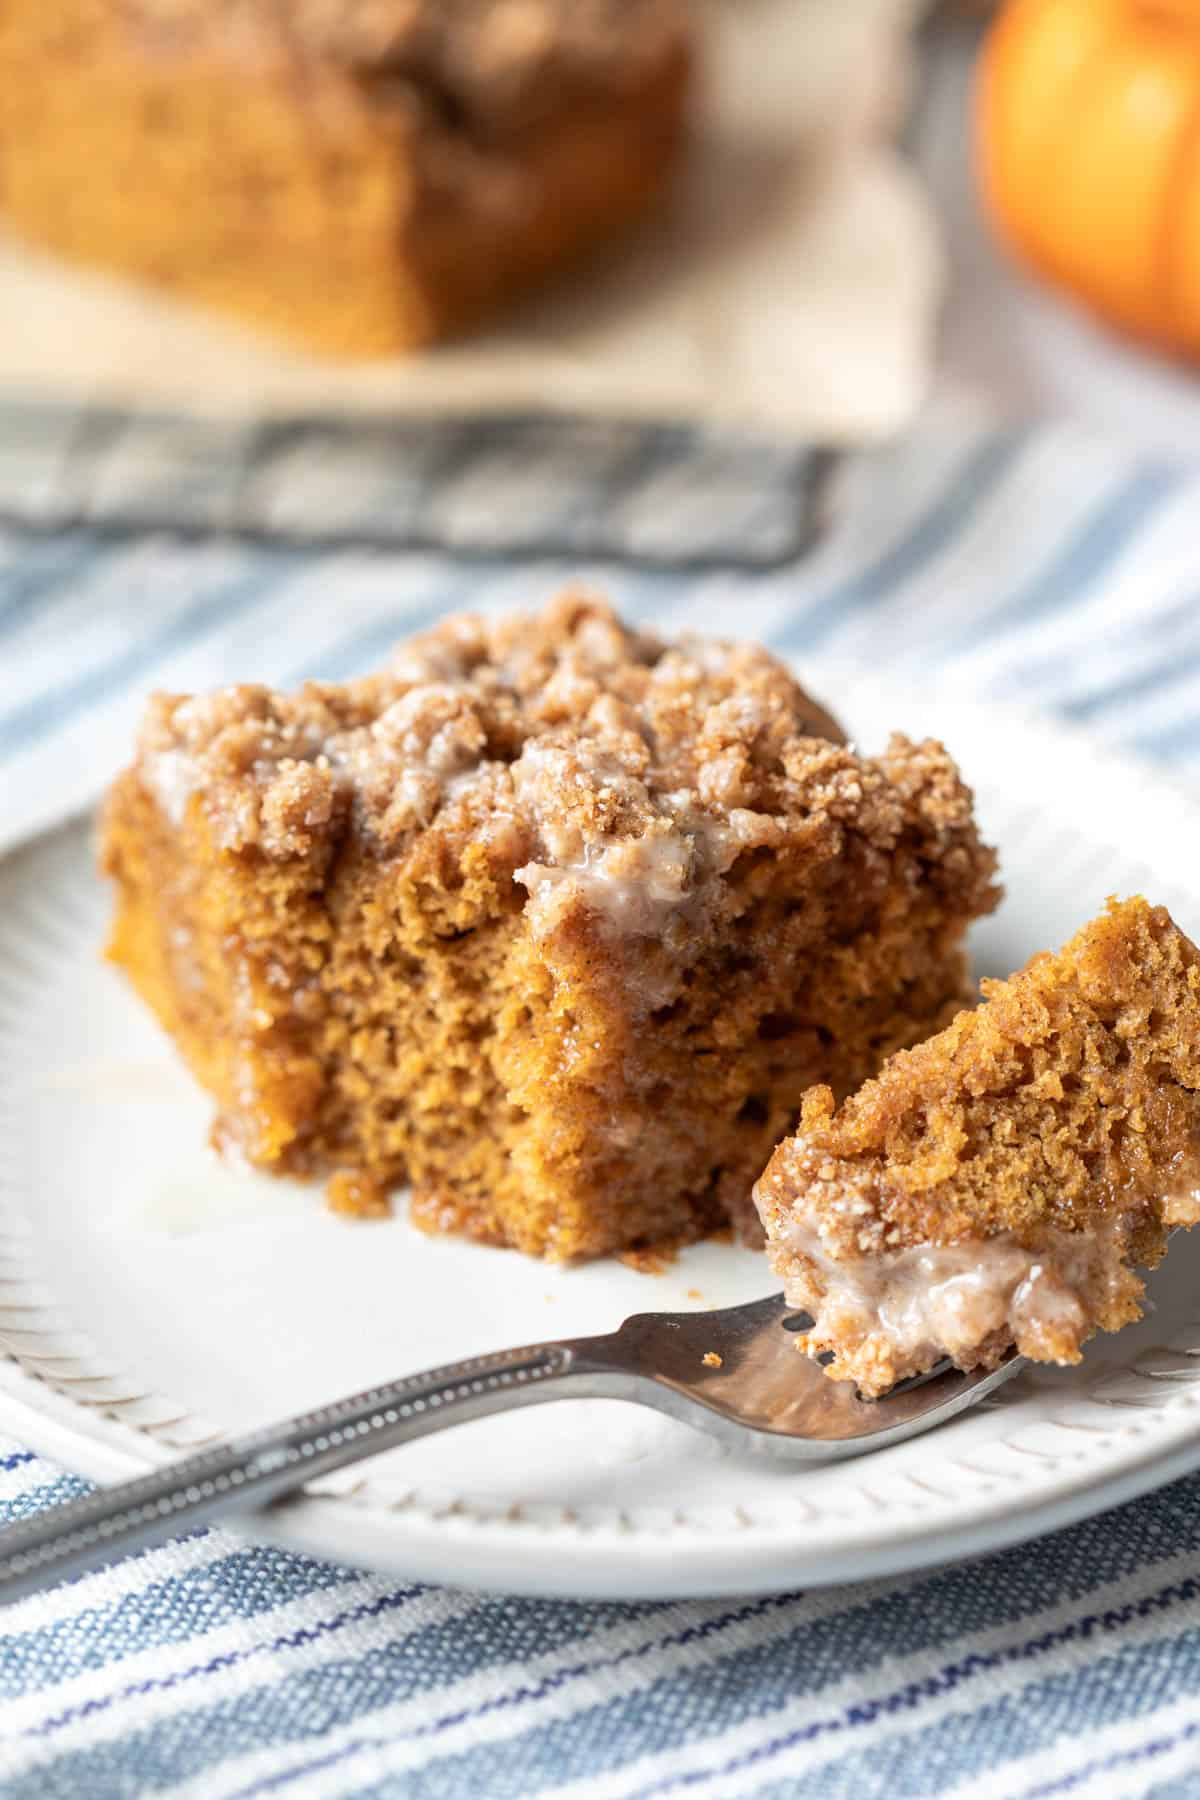 A moist bite of vegan pumpkin cake resting on a fork next to whole piece showing texture.